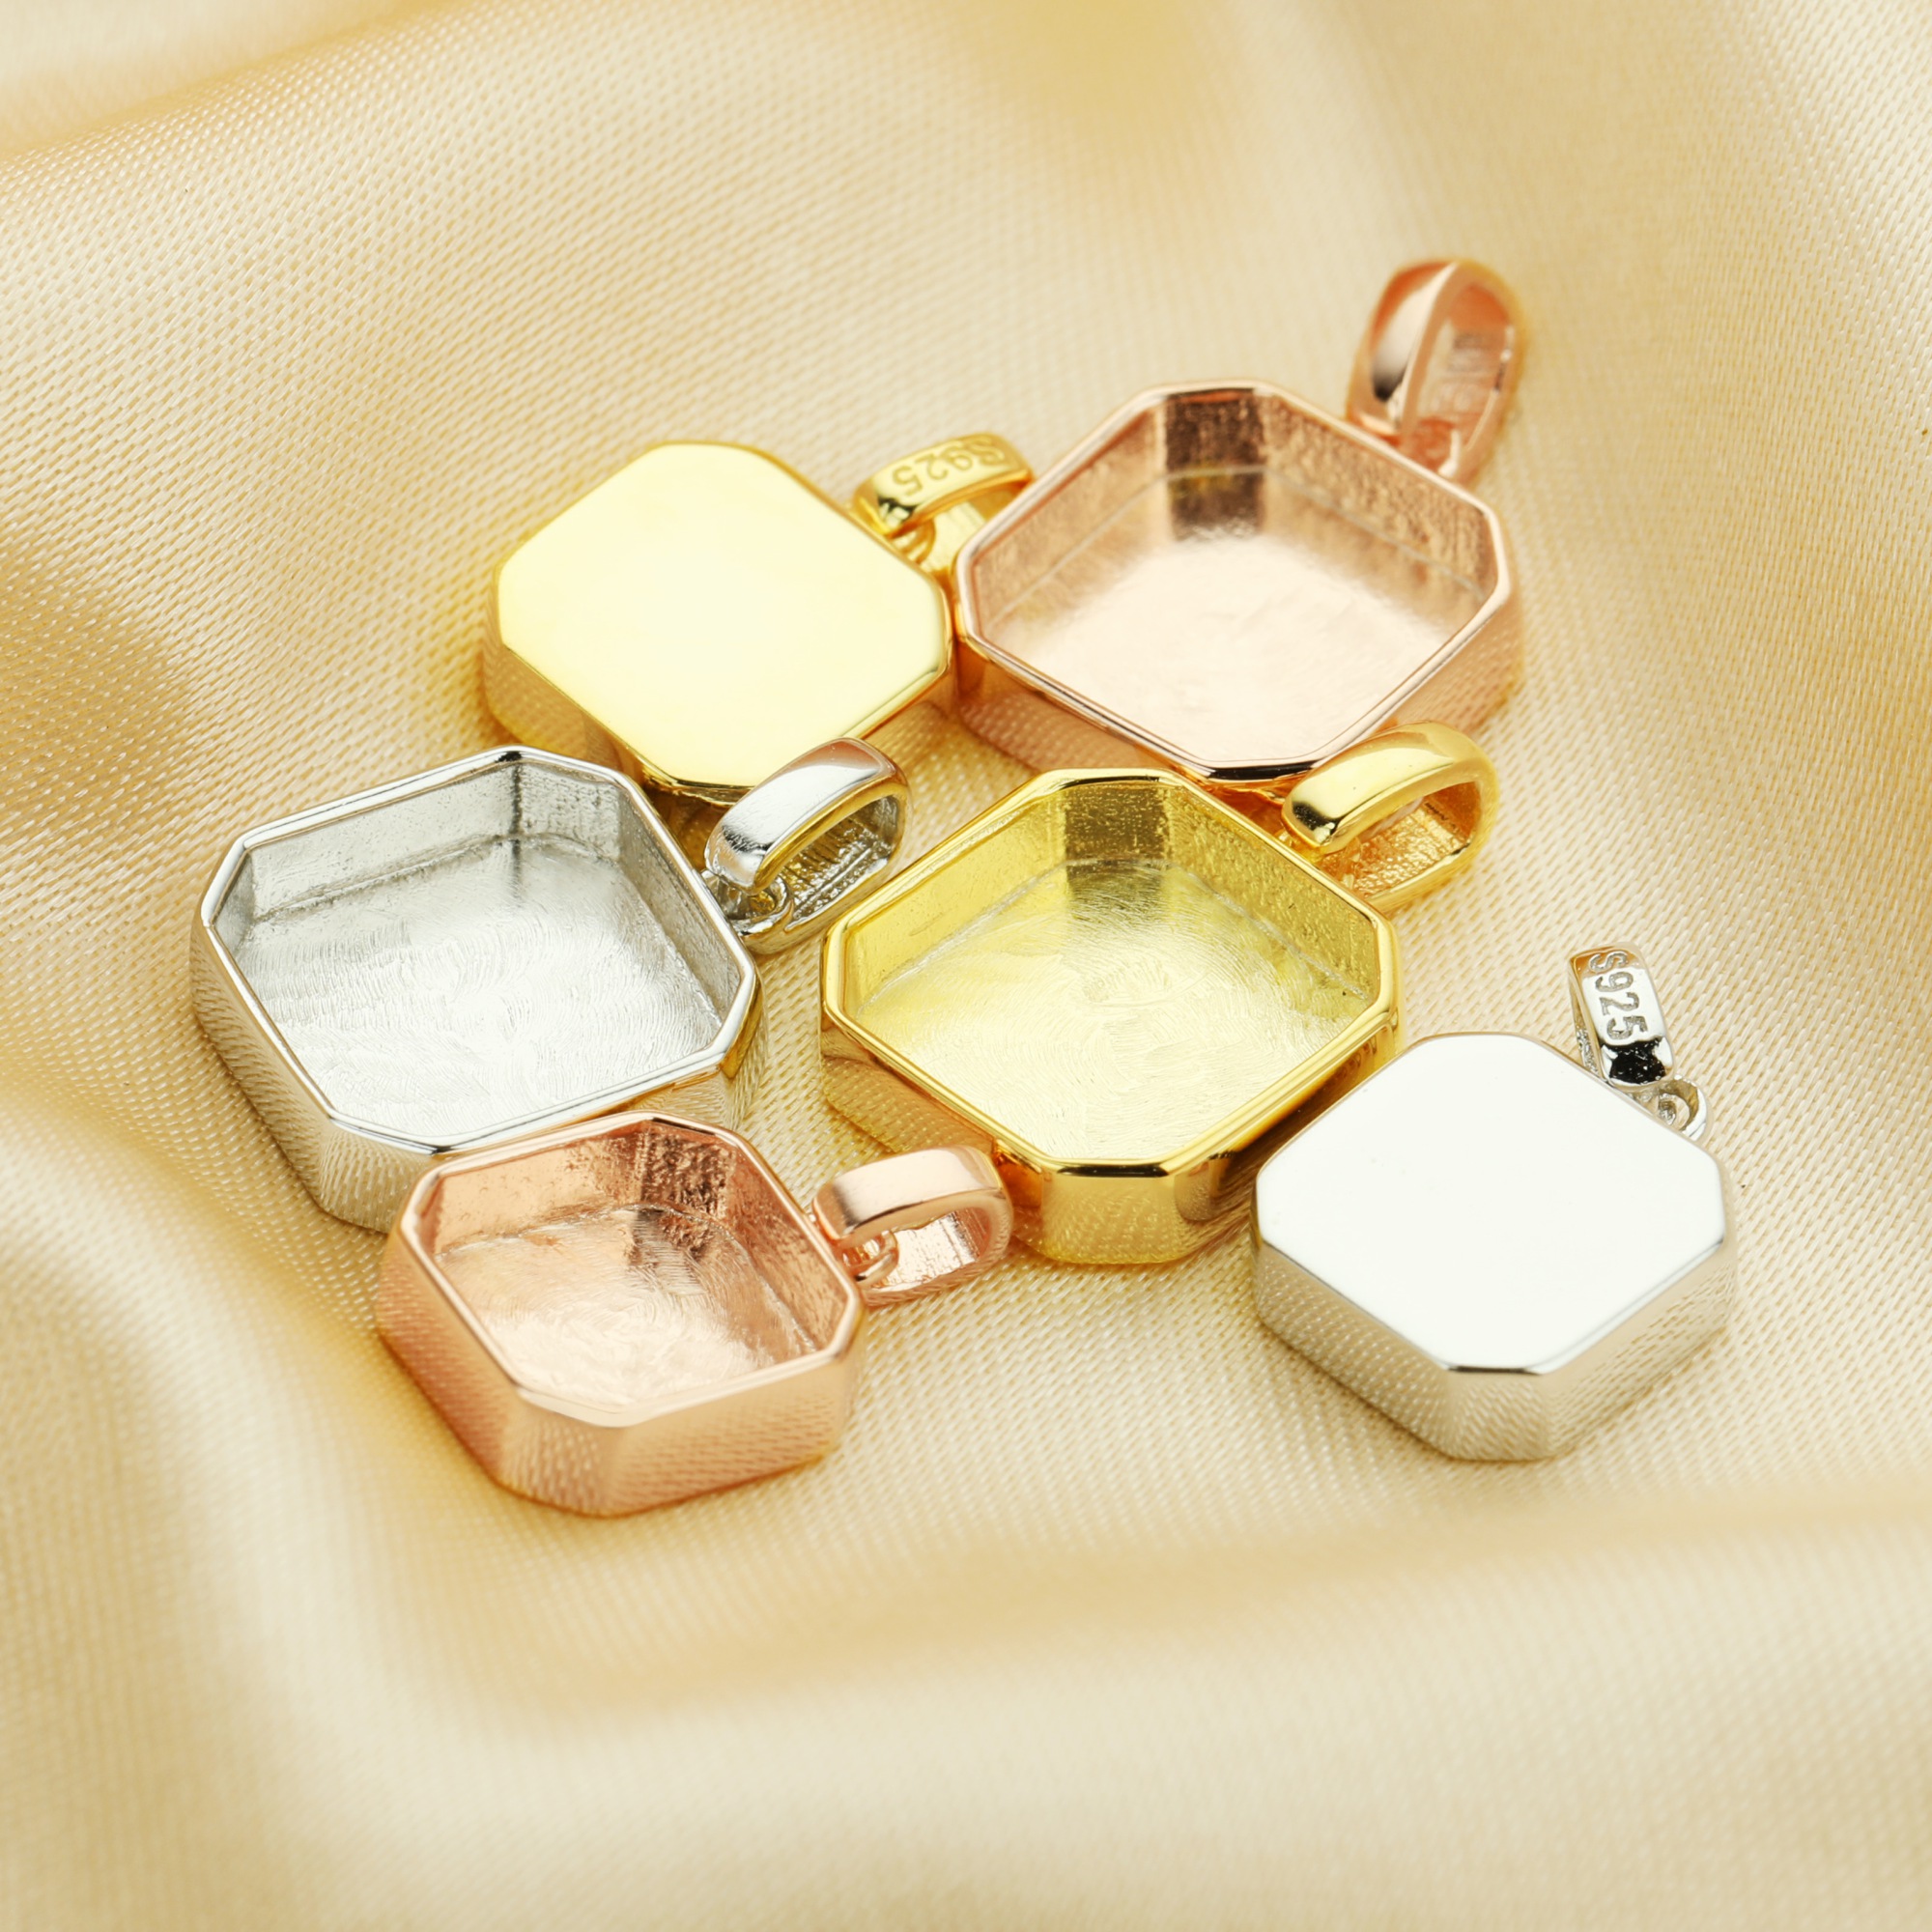 Keepsake Breast Milk Resin Square Pendant Bezel Settings,Solid 925 Sterling Silver Rose Gold Plated Pendant,DIY Memory Jewelry 1431185 - Click Image to Close